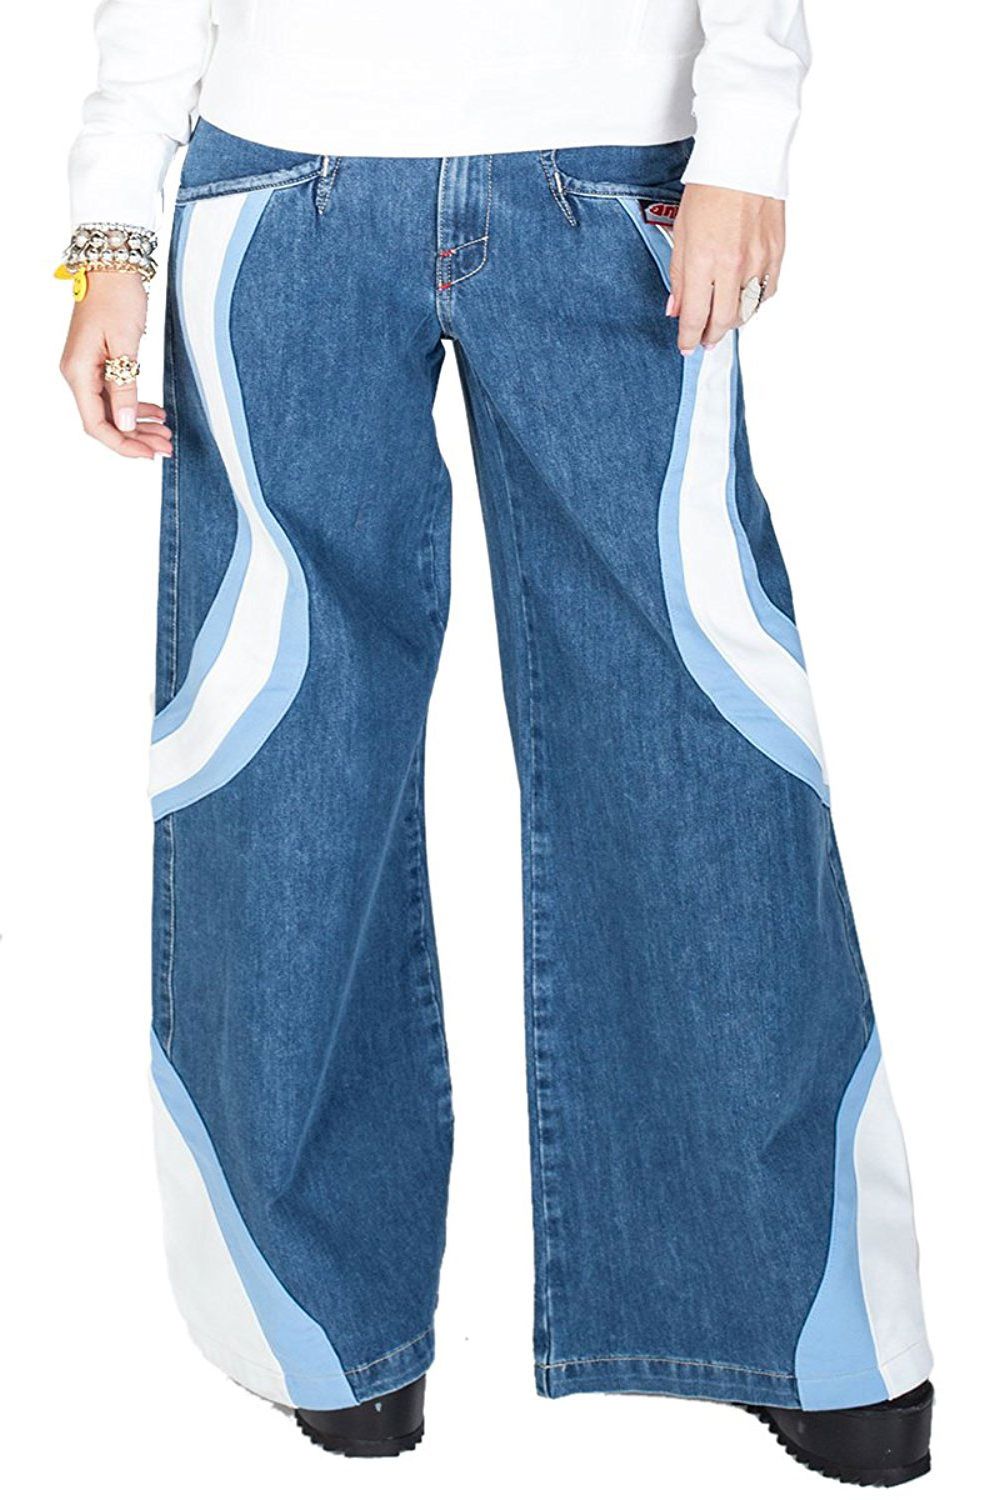 16 Pairs of Pants You Can Buy on Amazon